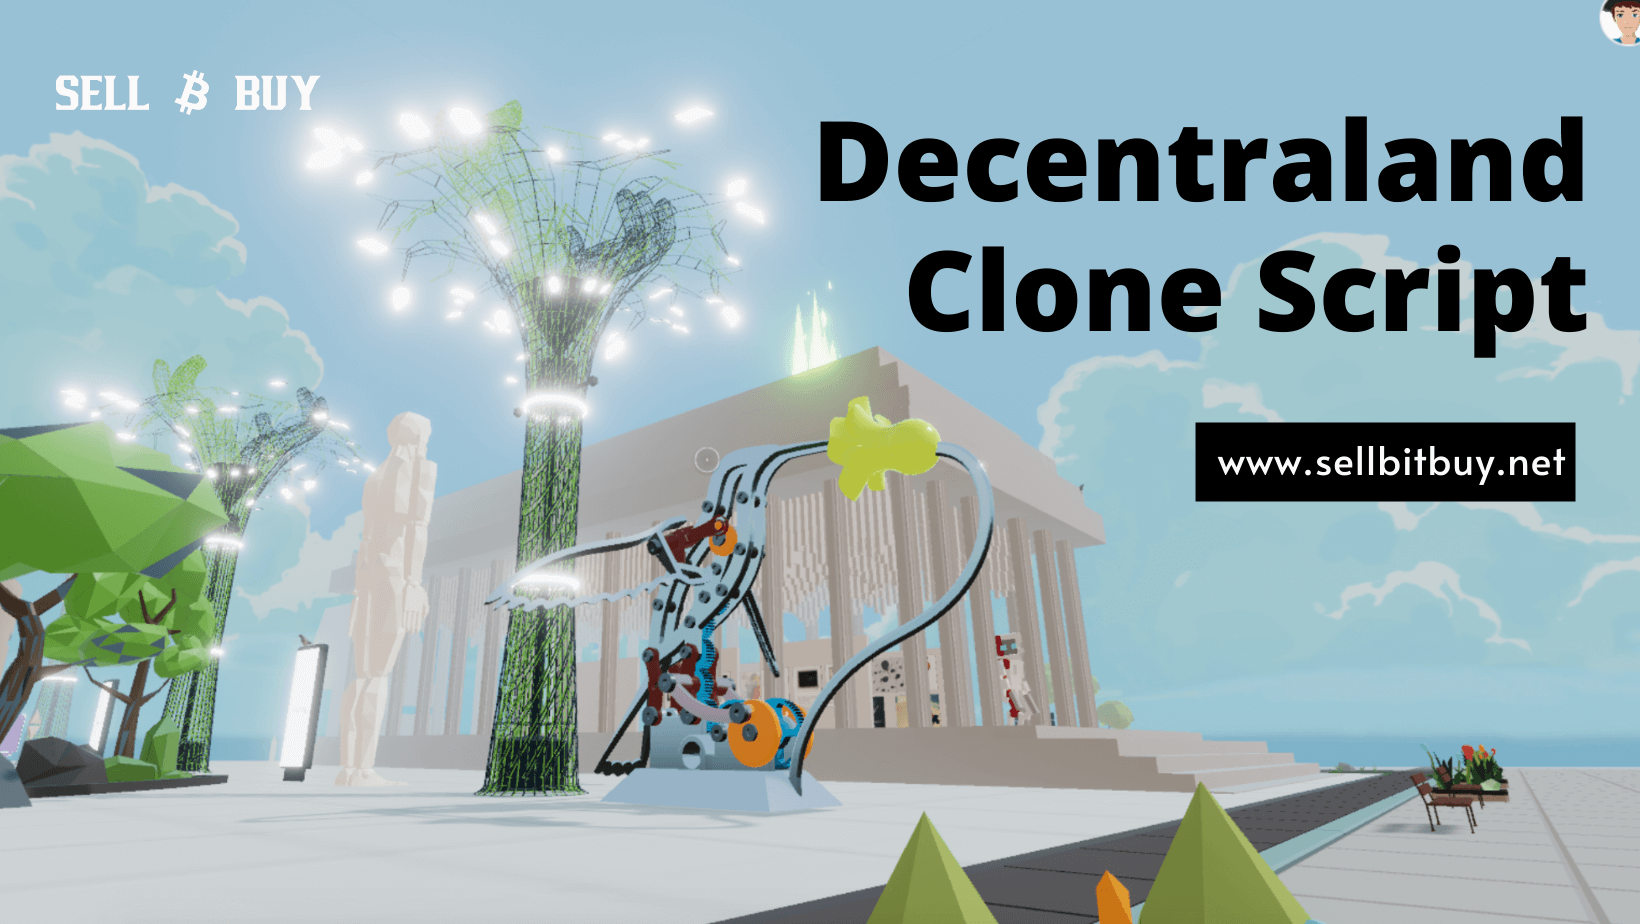 Article about How To Build NFT Marketplace Like Decentraland